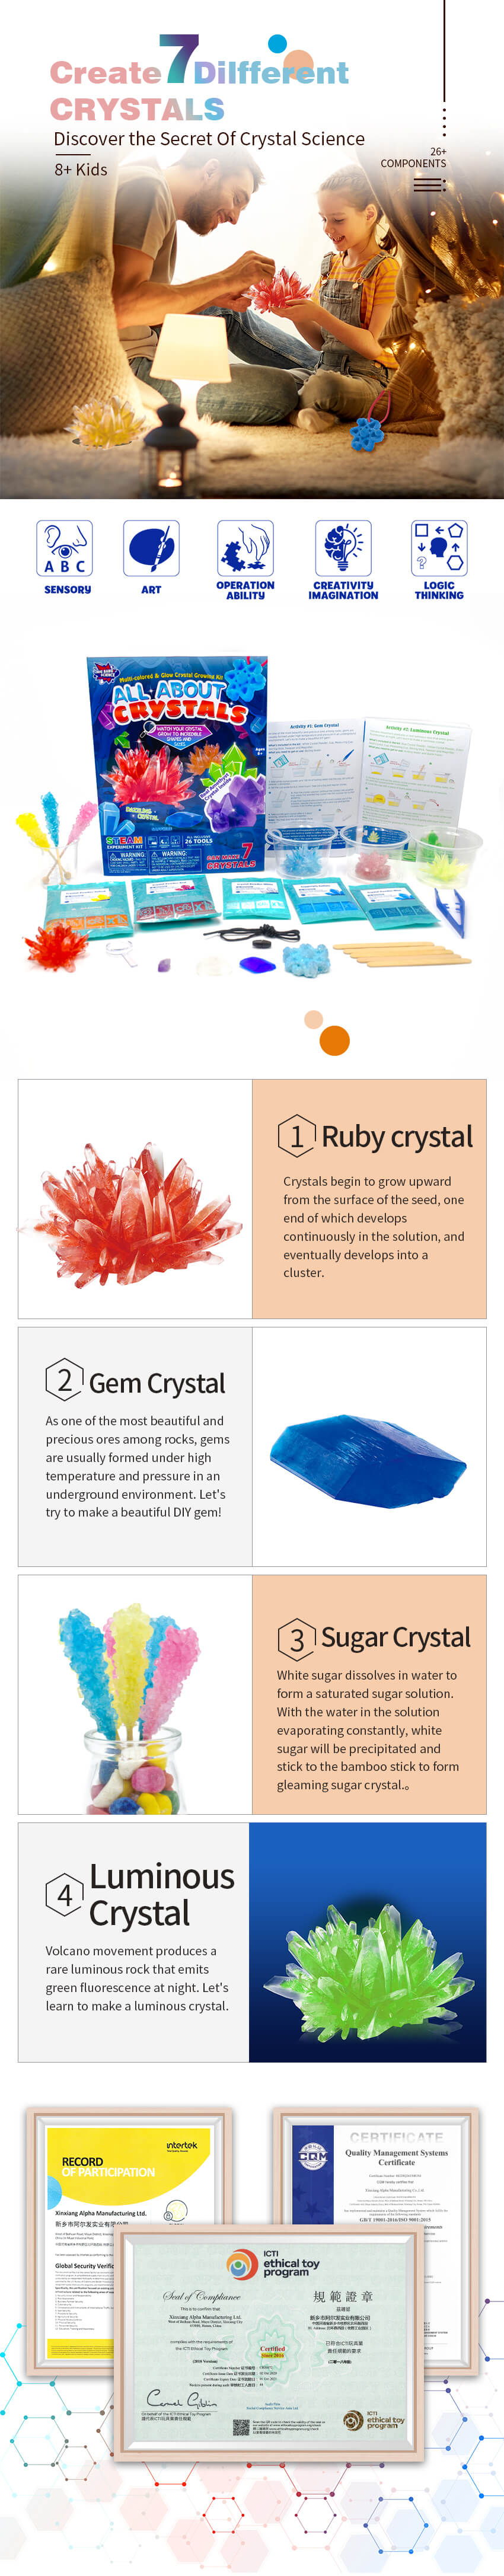 All-About-Crystal-product-details